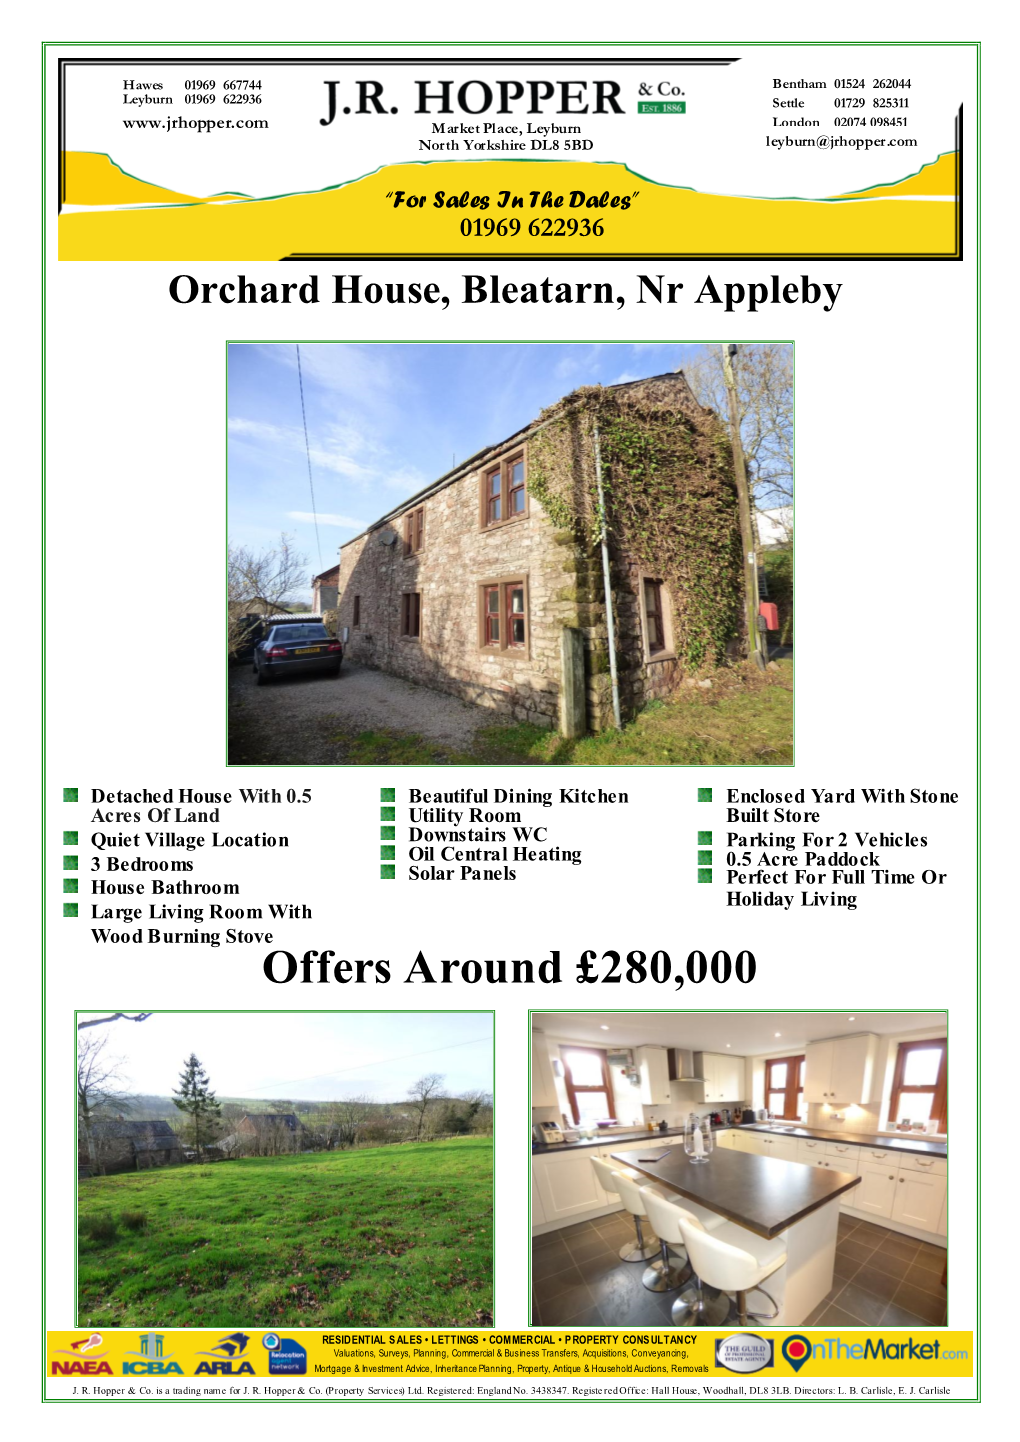 Orchard House, Bleatarn, Nr Appleby Offers Around £280000